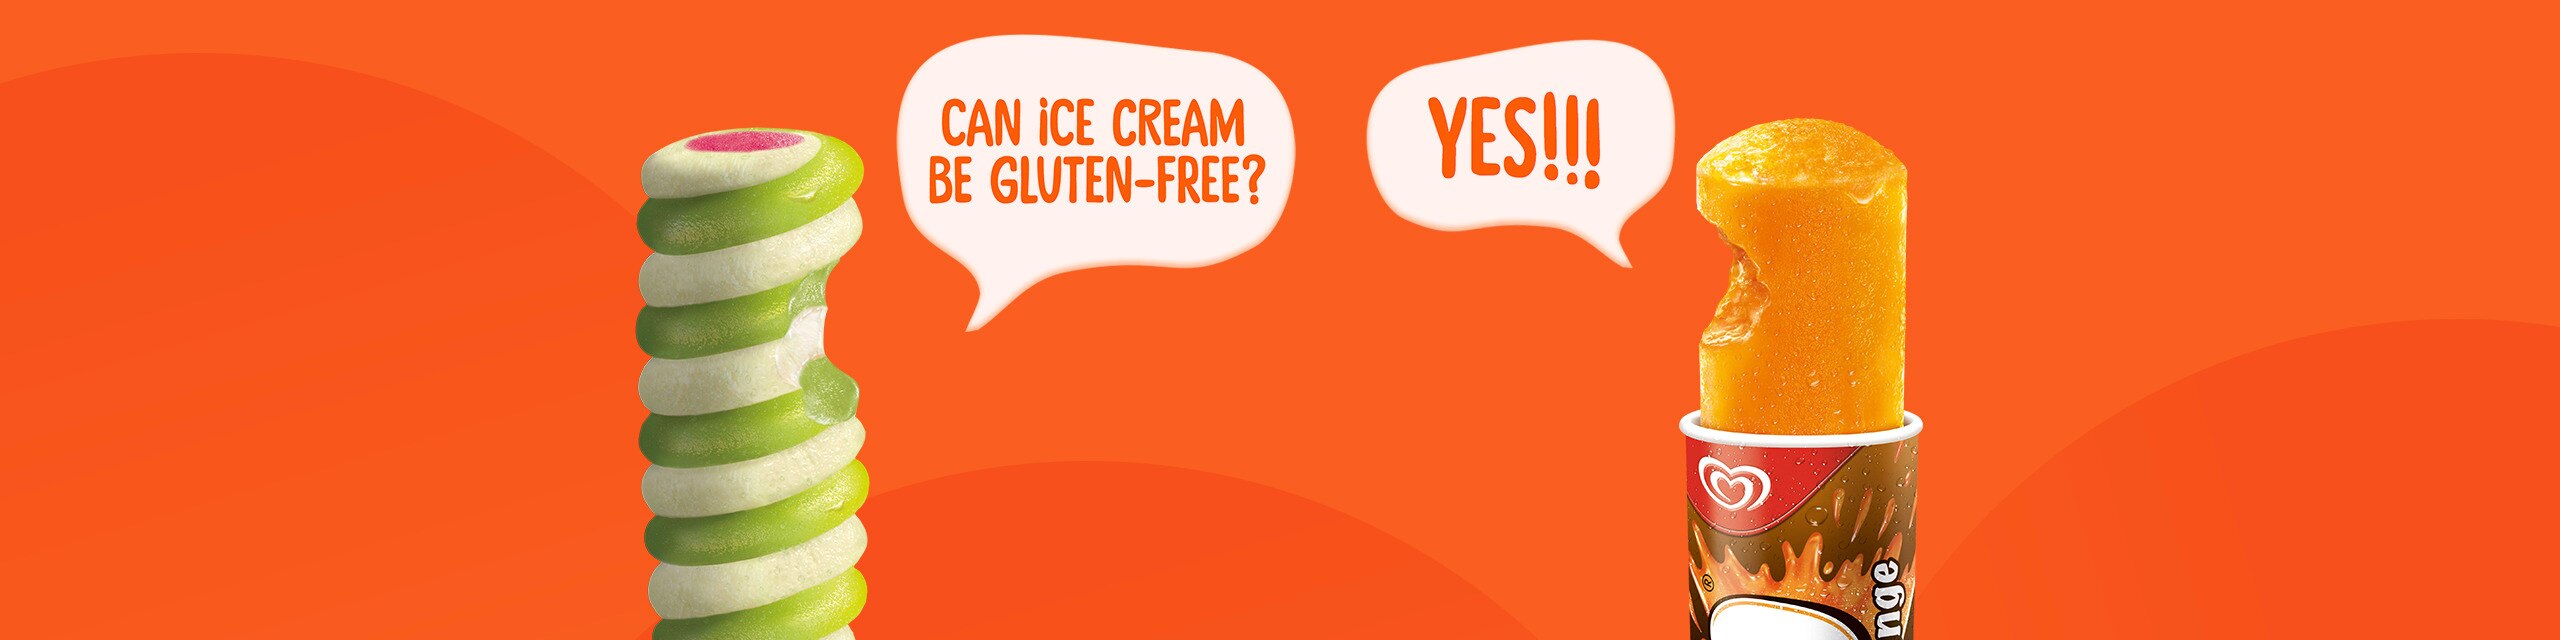 Our gluten-free ice creams